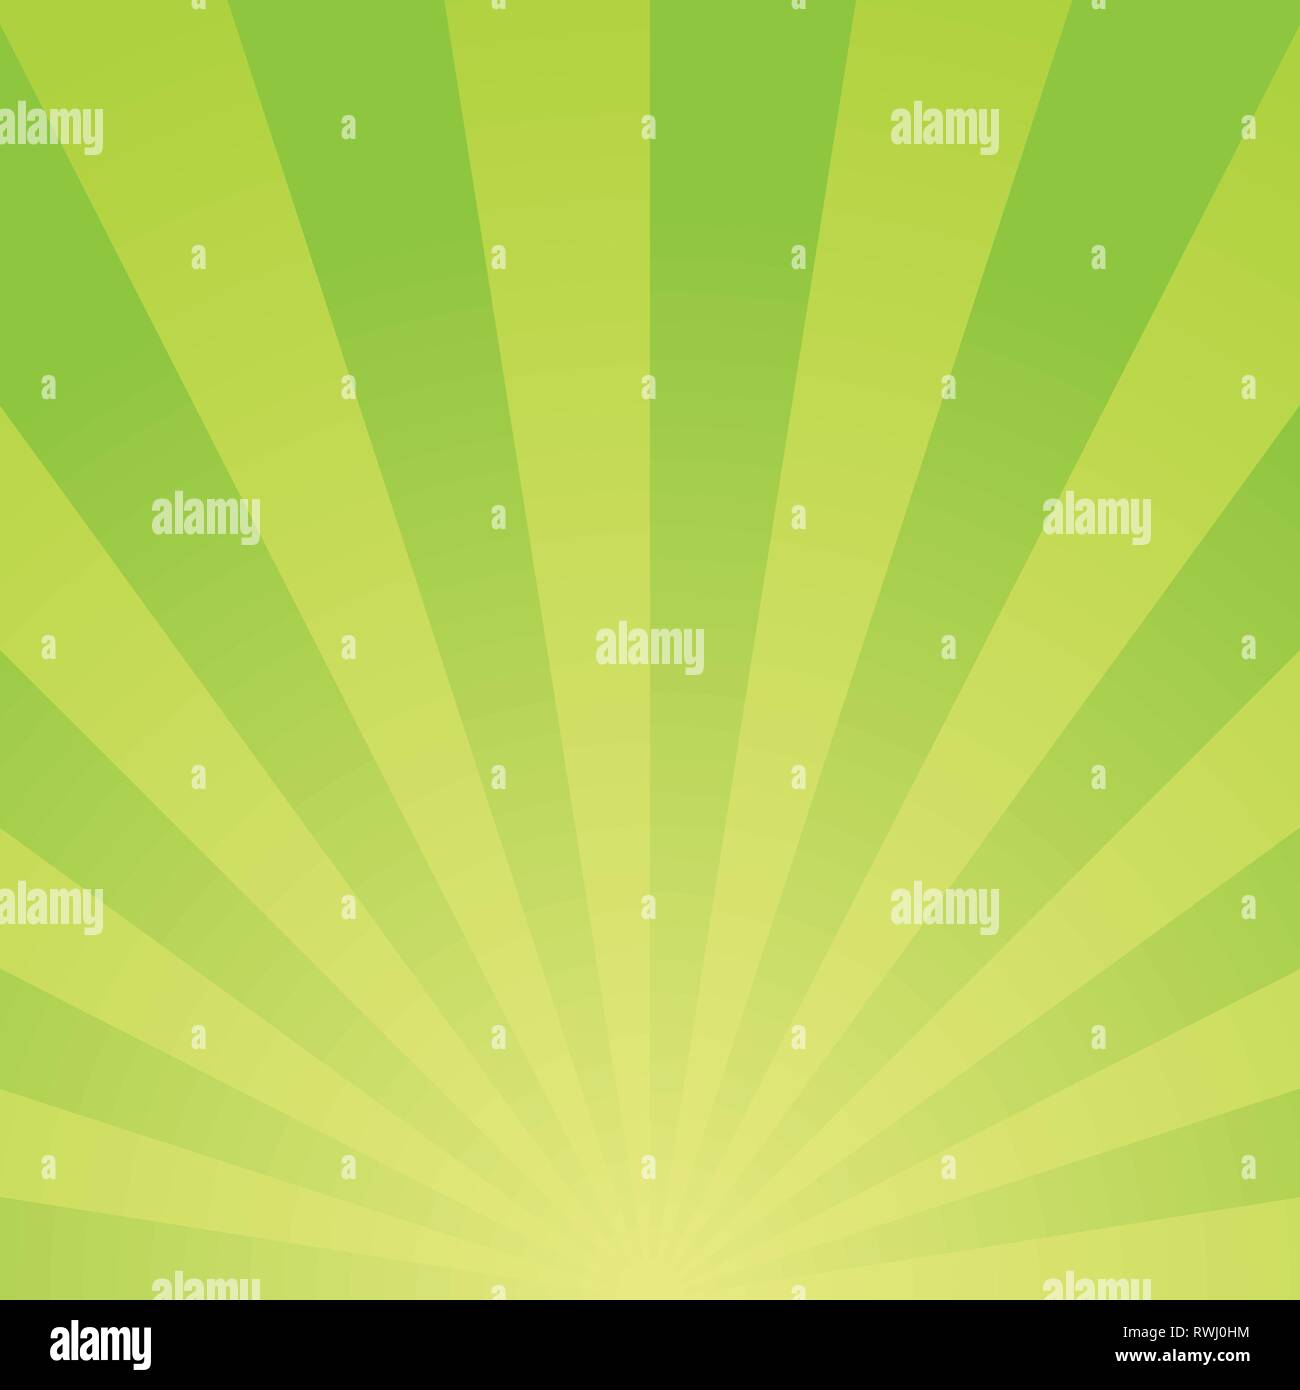 Sunburst vector pattern with green color palette. Stock Vector